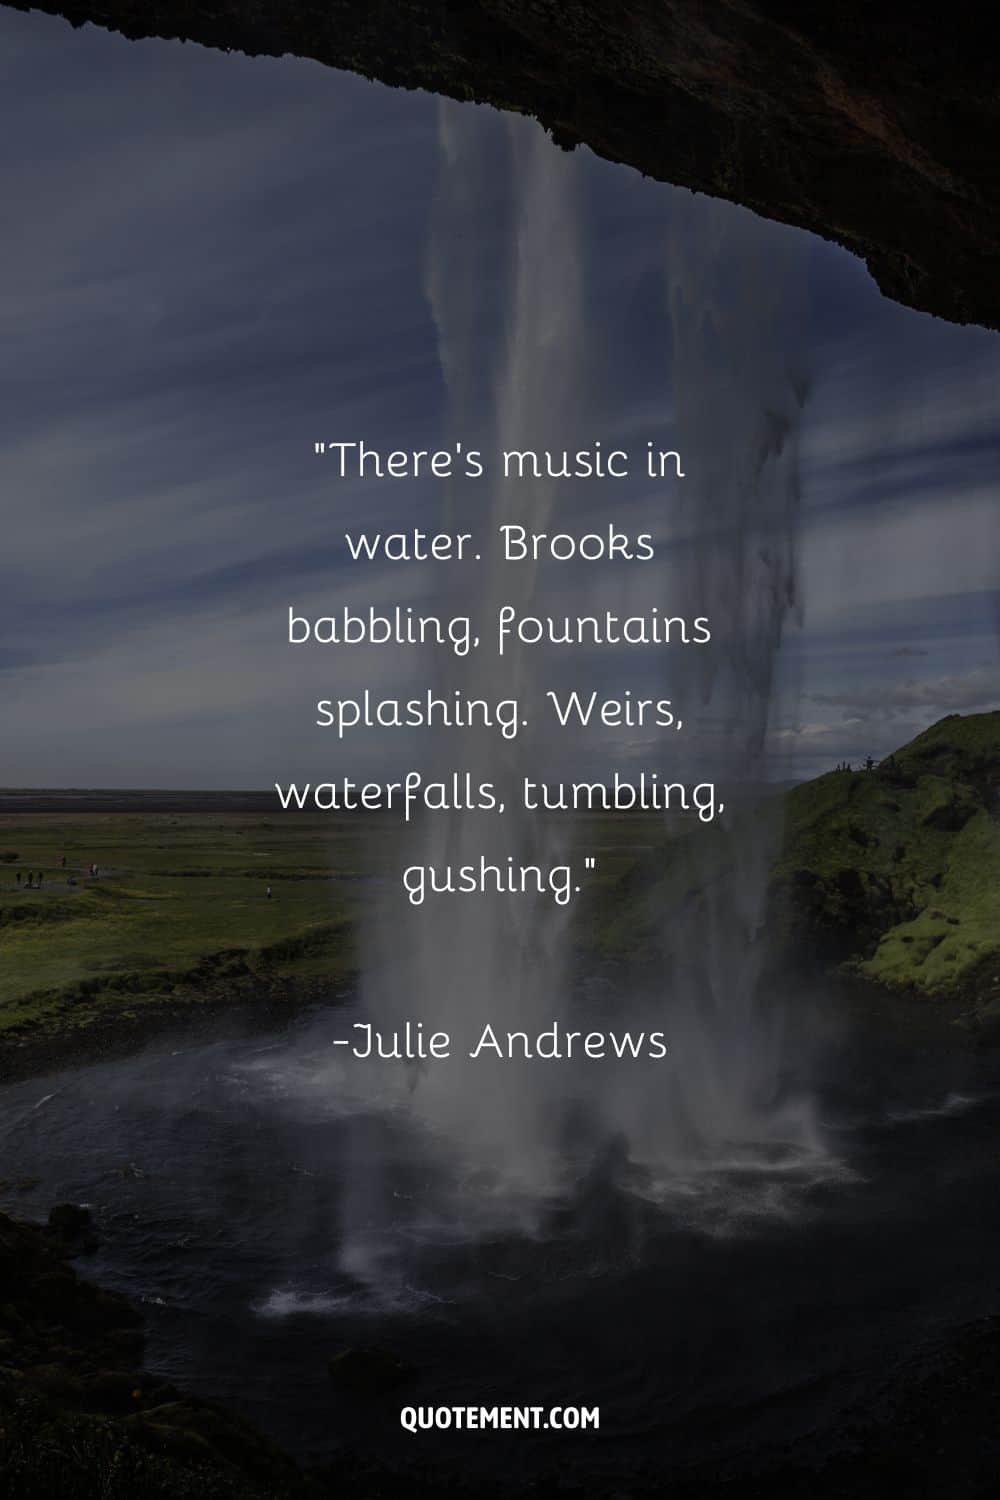 Inspirational quote by Julie Andrews on water, and a waterfall in the background
